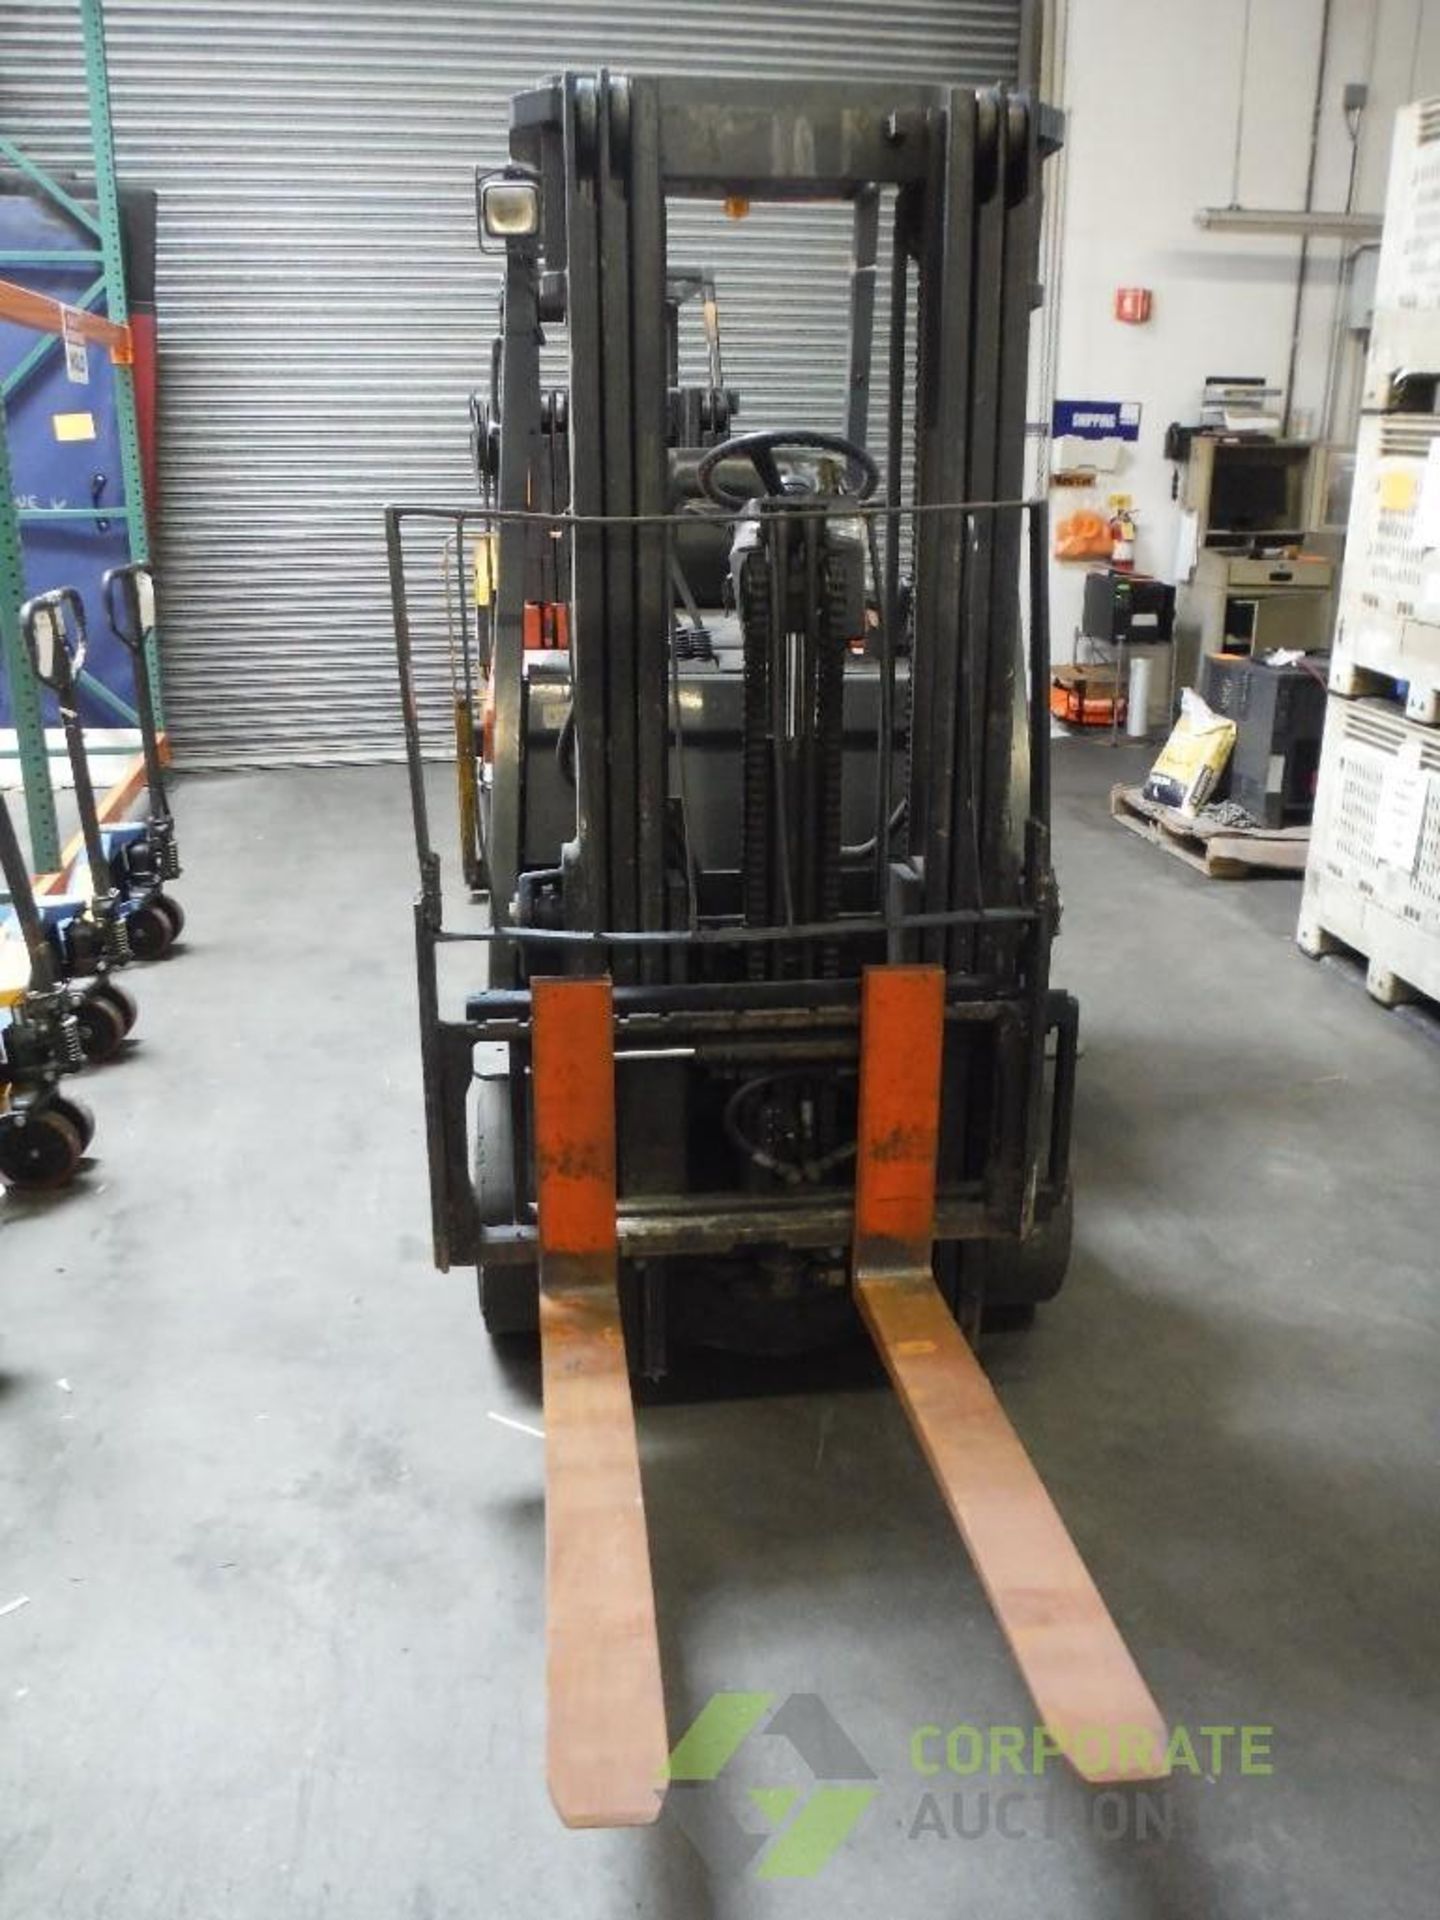 Toyota 36 volt electric fork lift, Model 7FBCU20, SN 60989, 3500 lb. capacity, side shift, 3 stage - Image 4 of 6